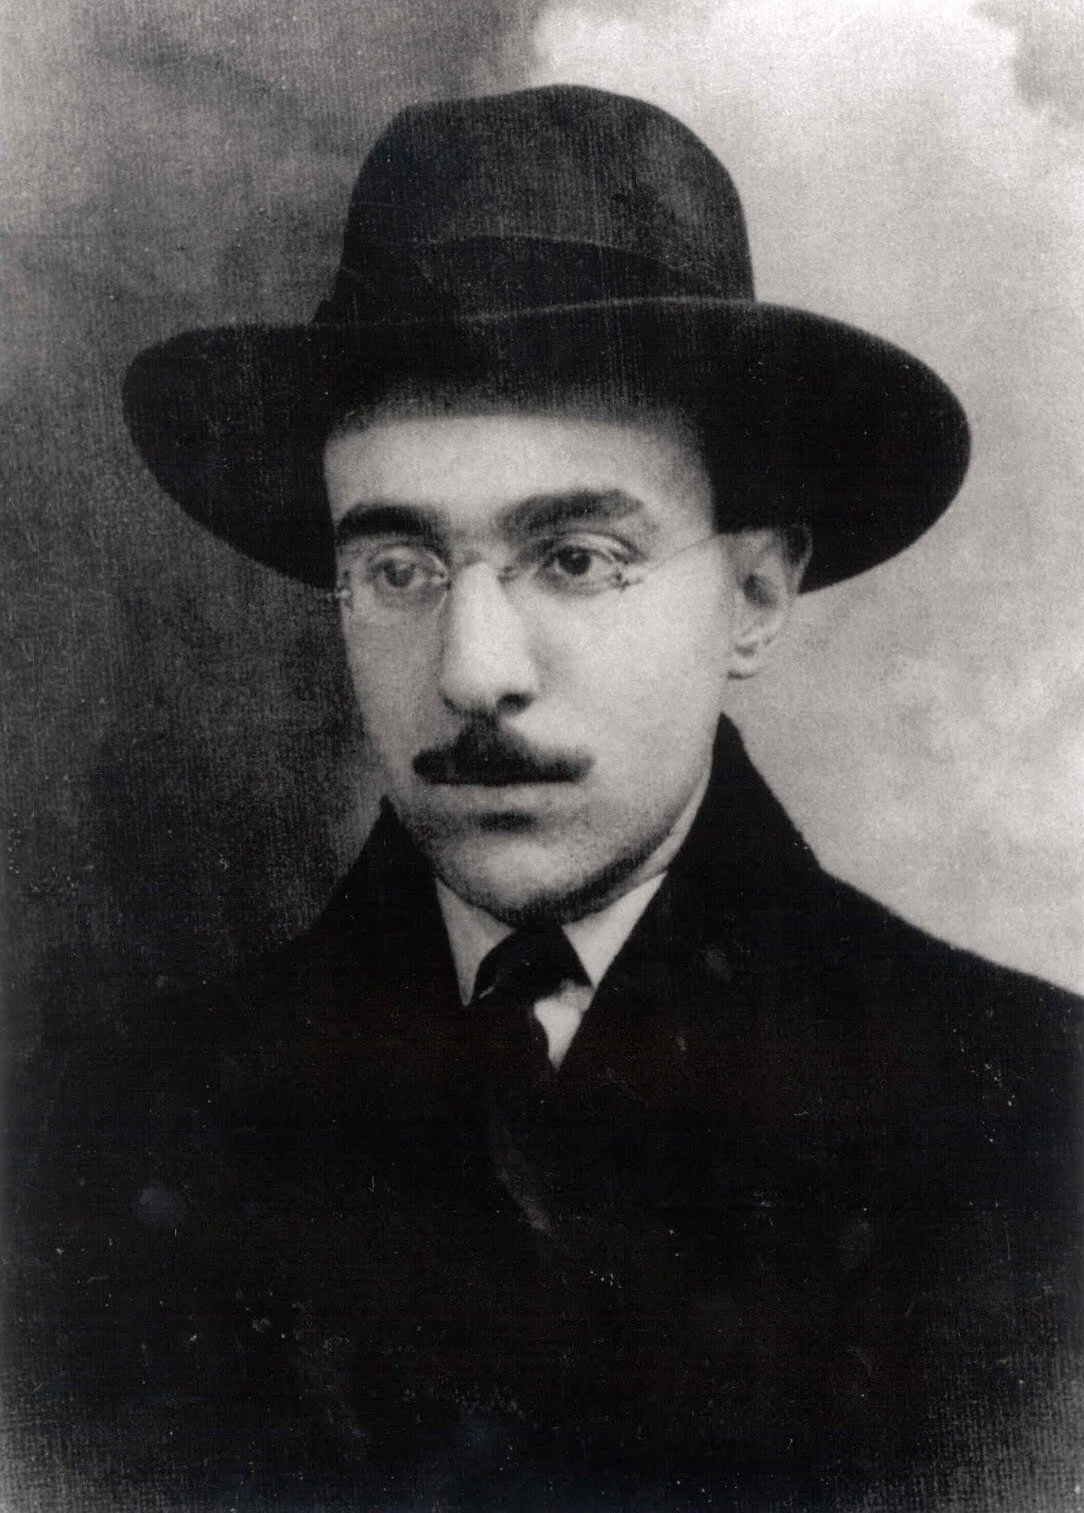 A black and white photo of Fernando Pessoa as a grown man, though still fairly young. He is in a suit and tie, wearing a full-brim hat, and glasses. He has a mustache that covers his upper lip, and thick eyebrows.